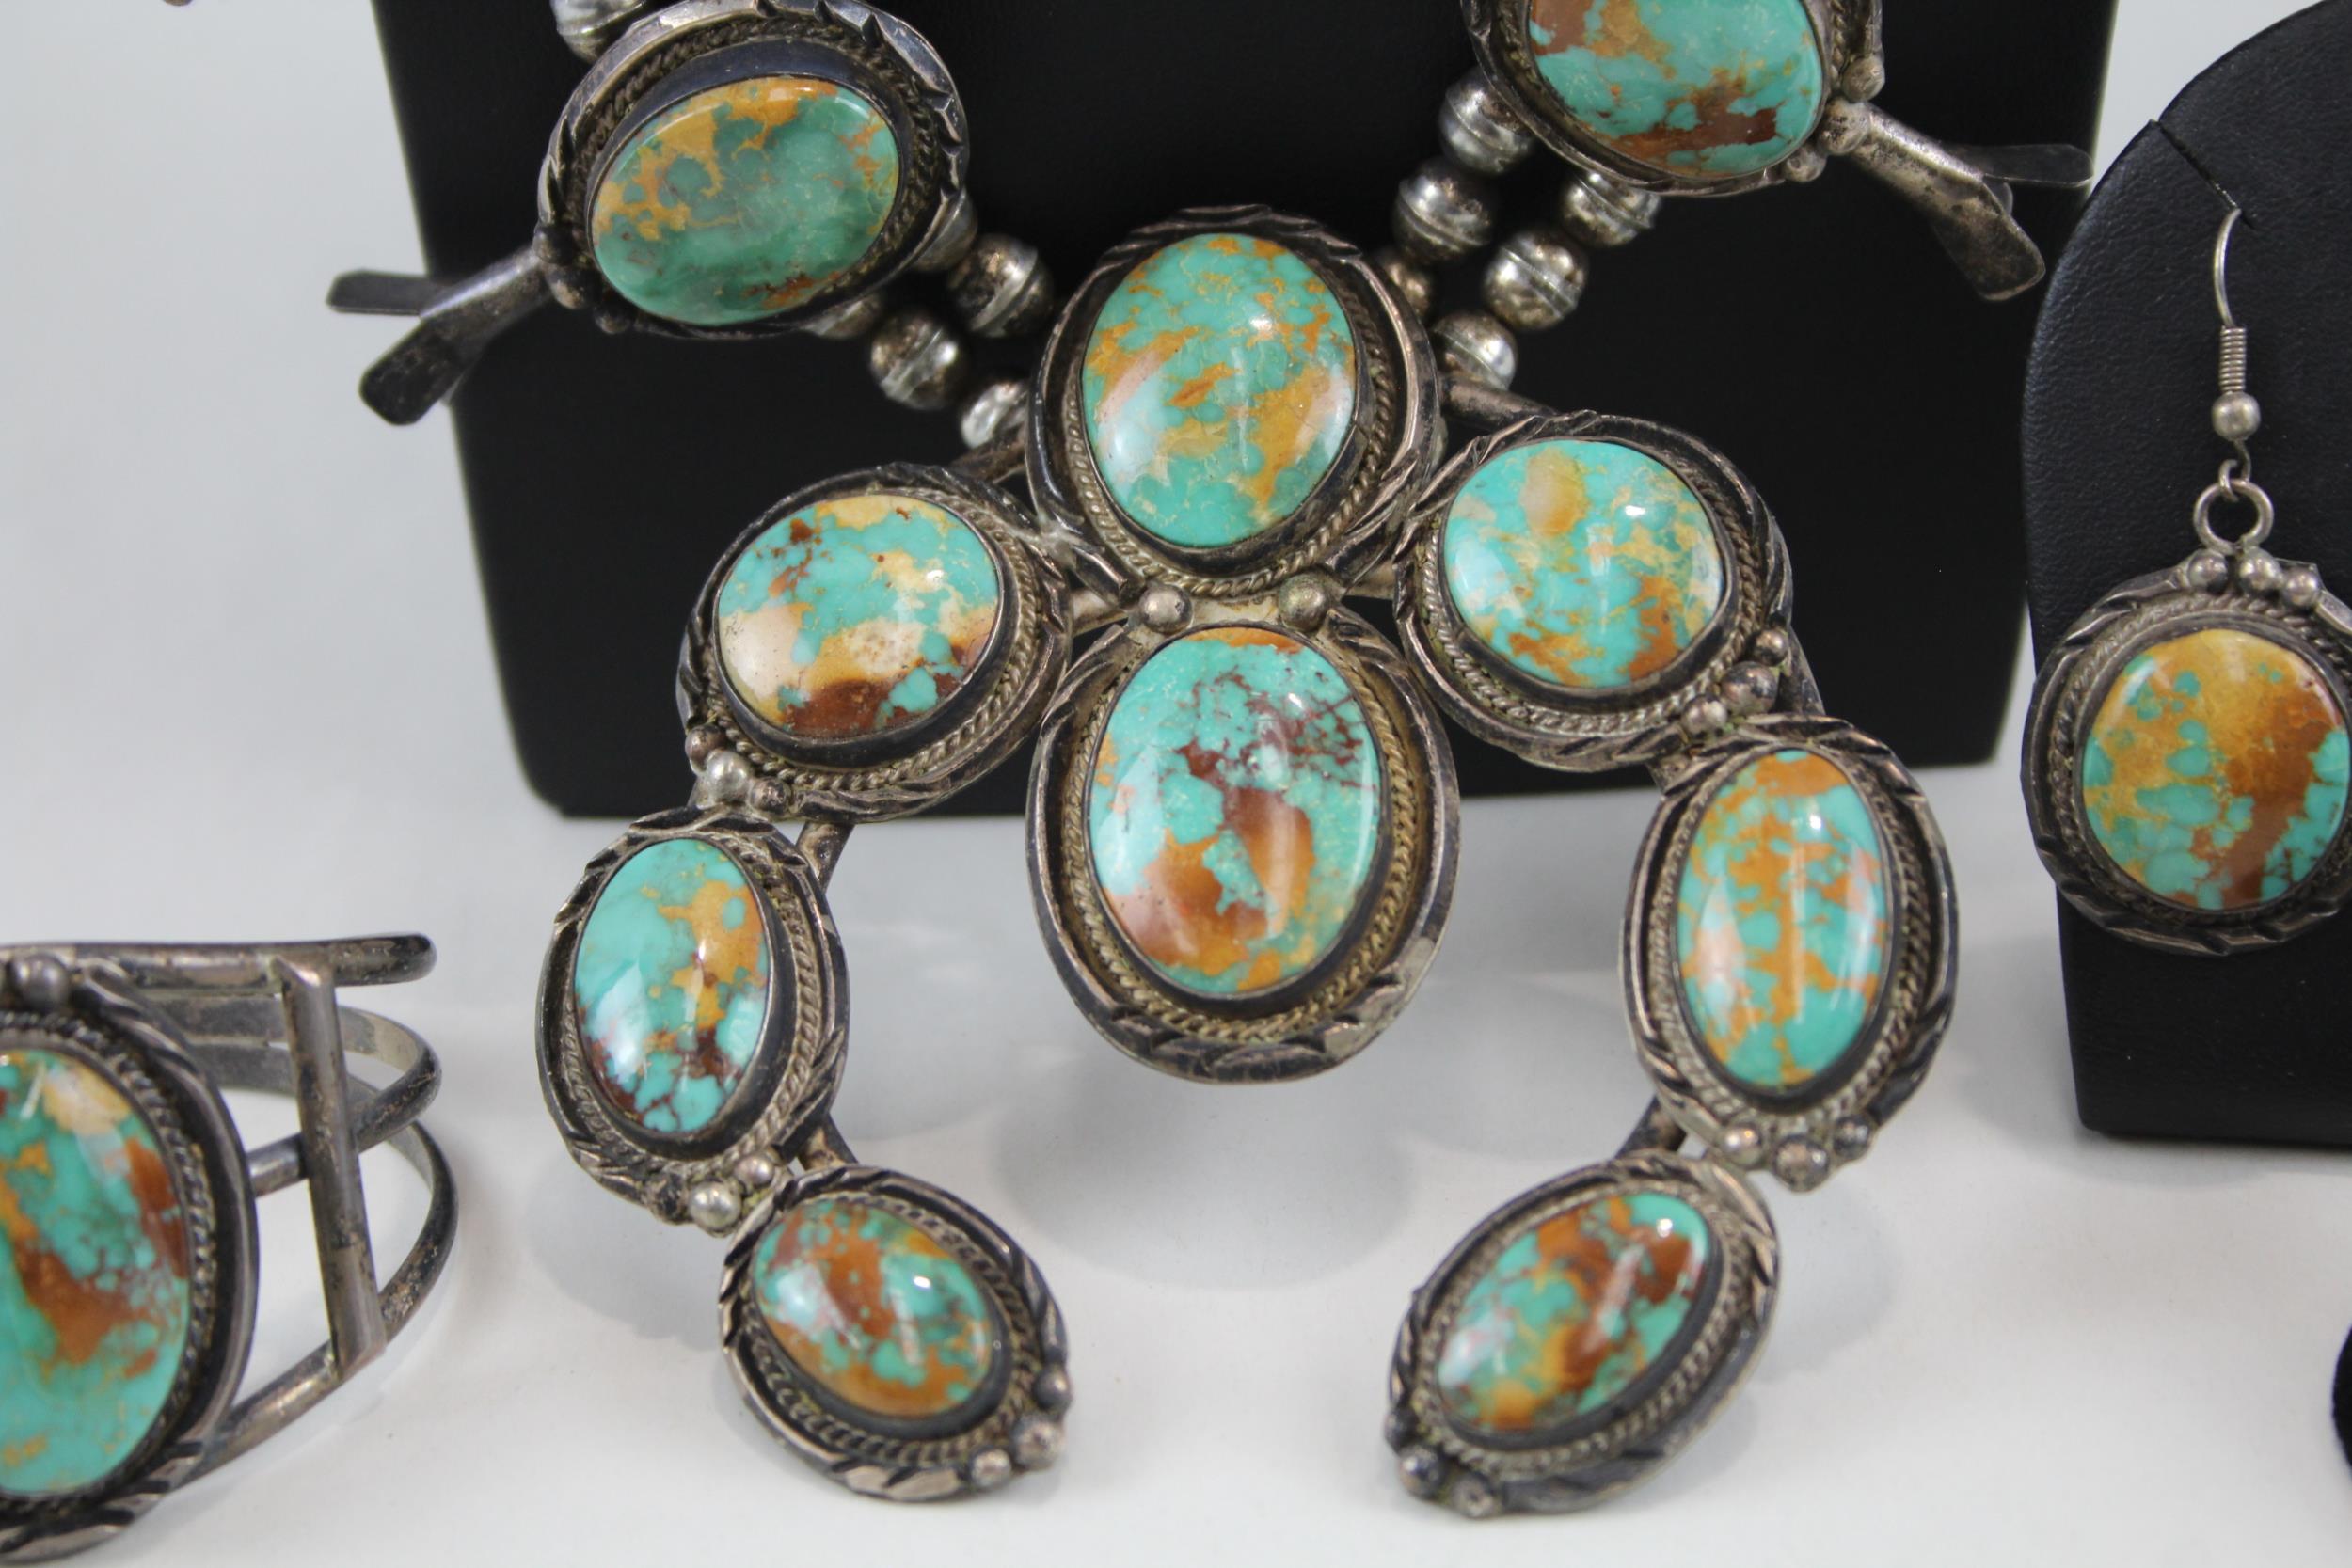 Silver Navajo jewellery set including squash blossom by Dave Pino (single earring) (315g) - Image 3 of 8